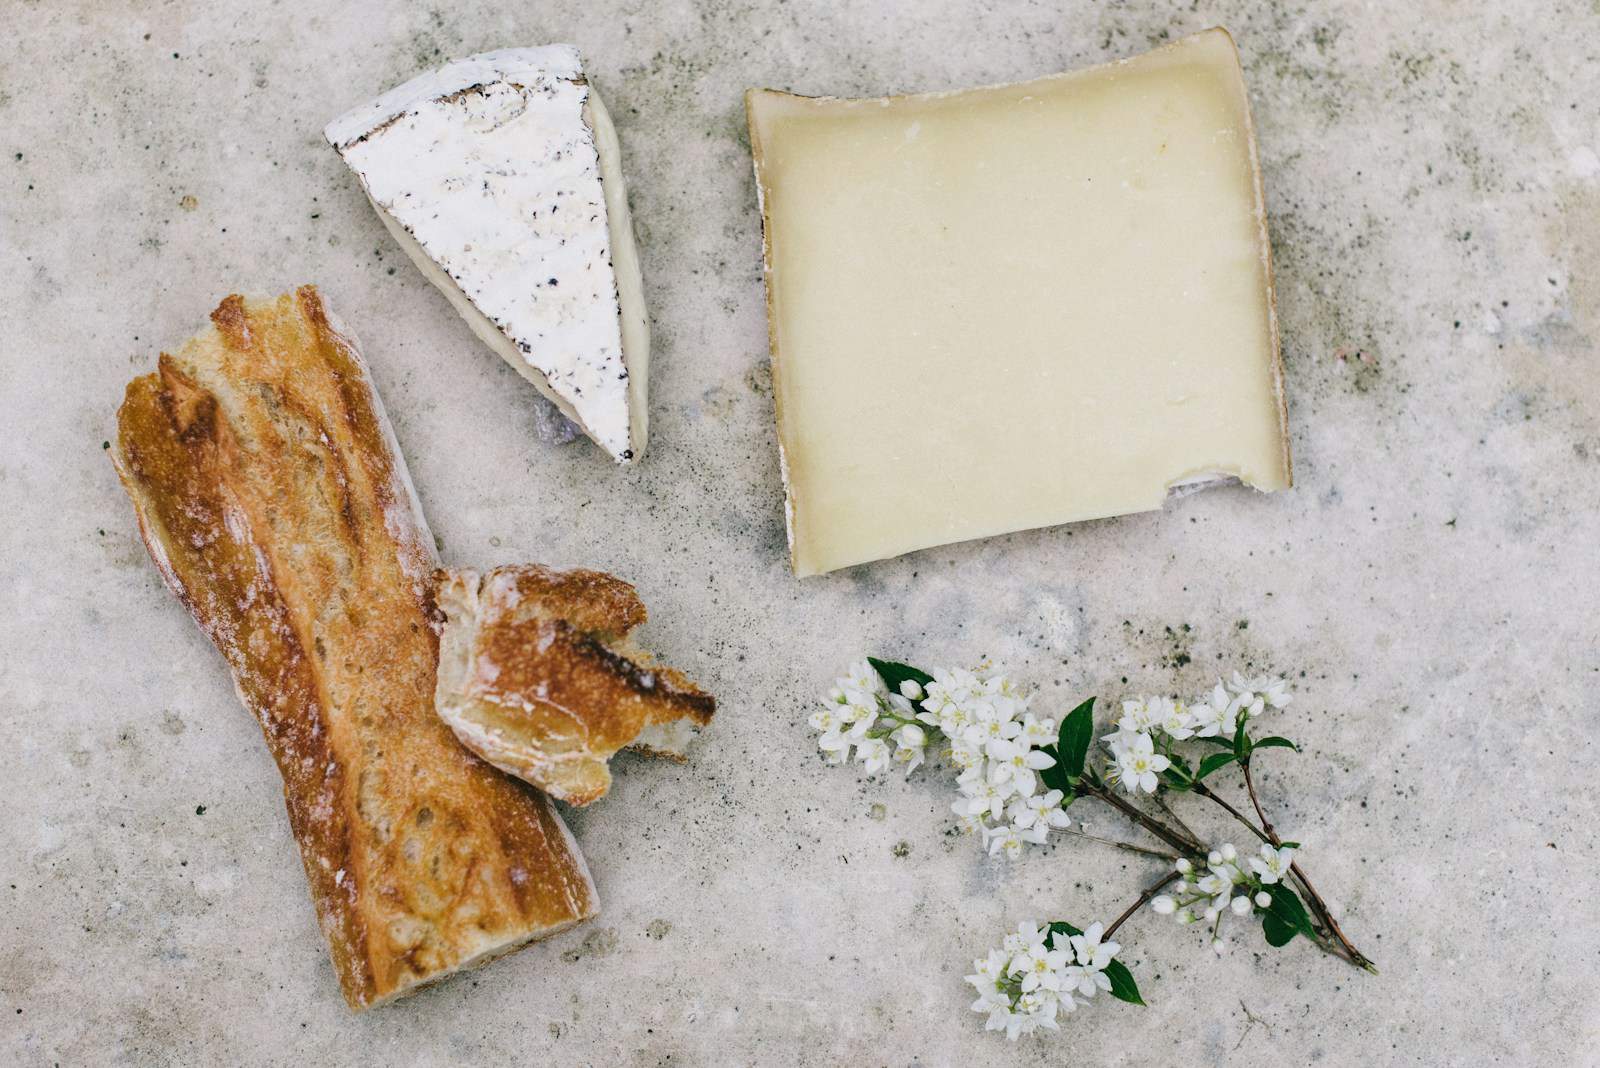 Cheese and a baguette portion beside white petaled flower.